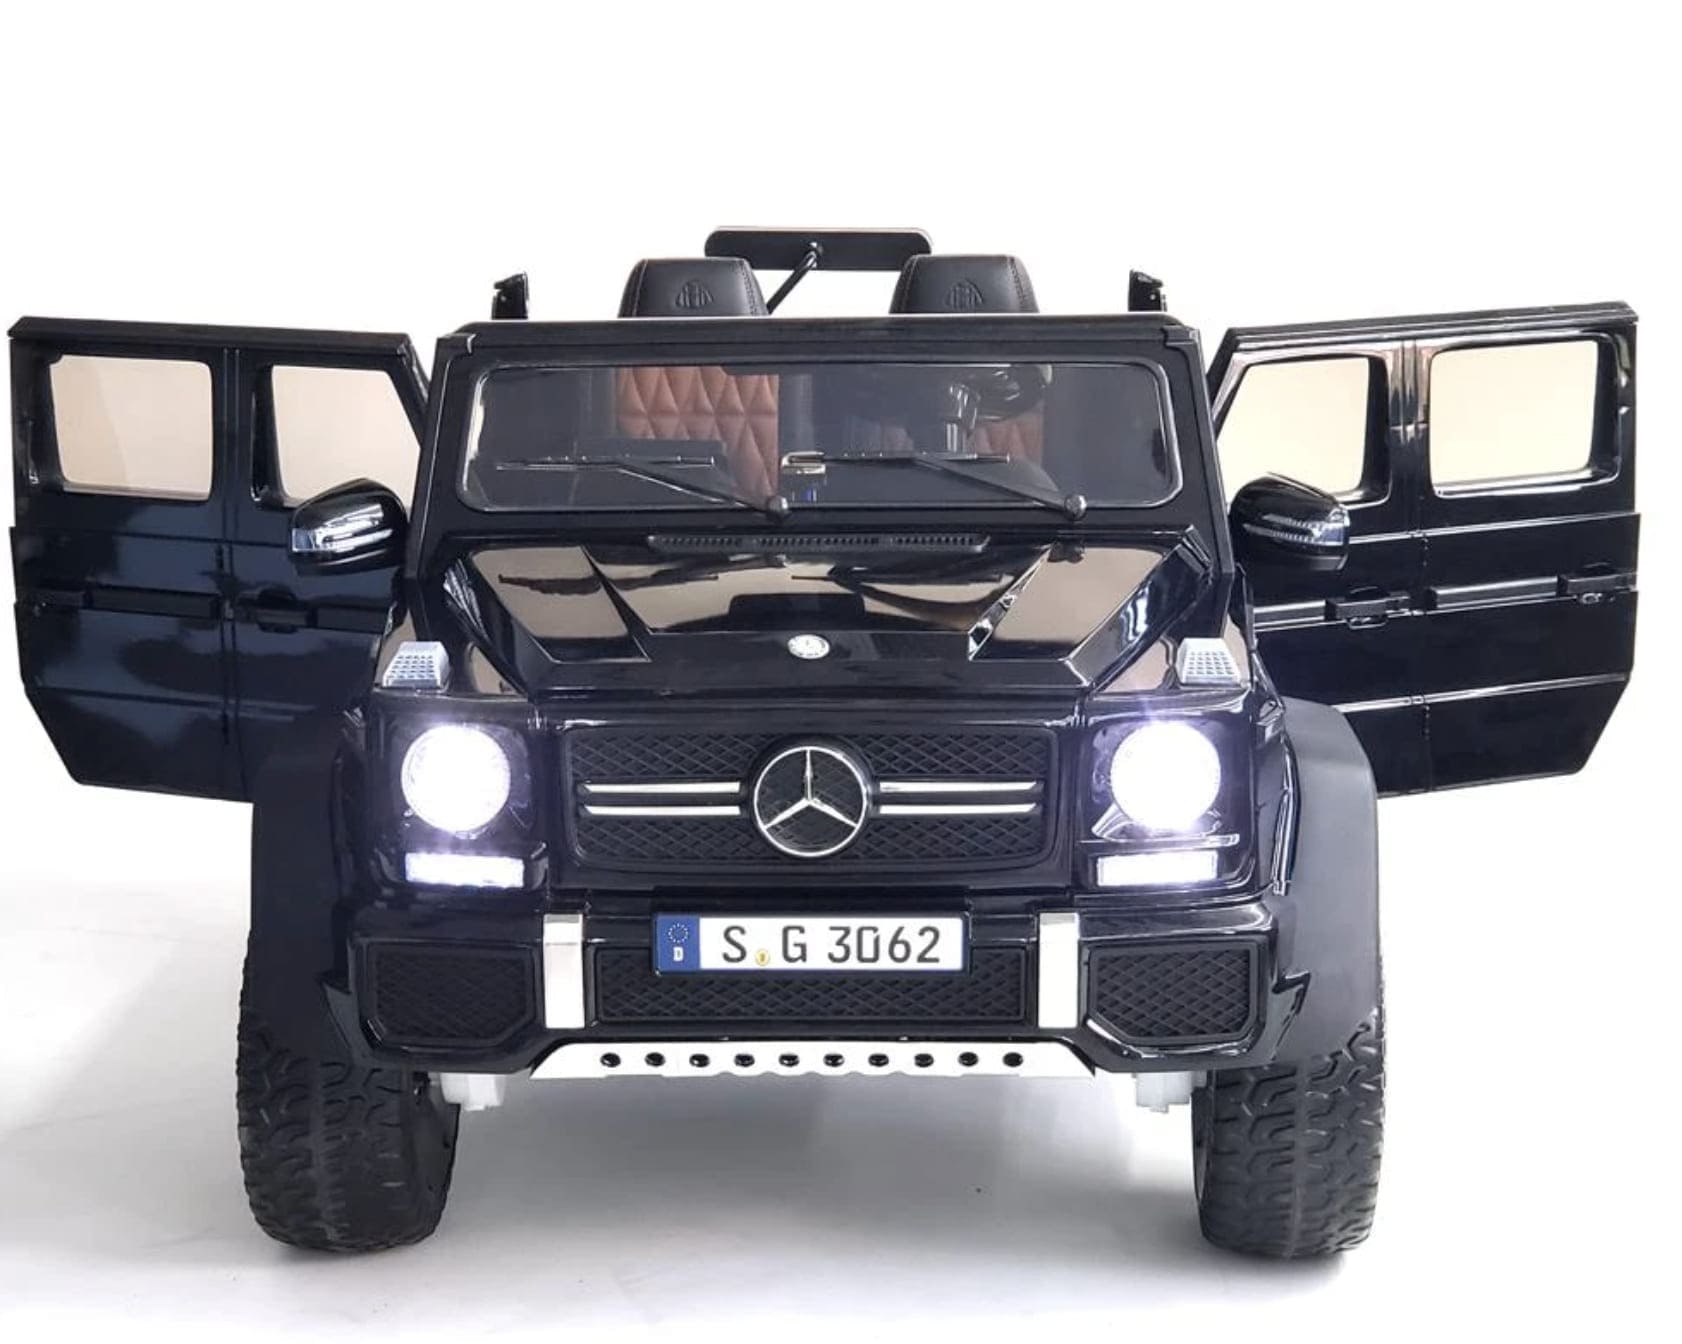 2023 Mercedes Benz Maybach G650S Car | 2 Seater > 24V (4x4) | Electric Riding Vehicle for Kids